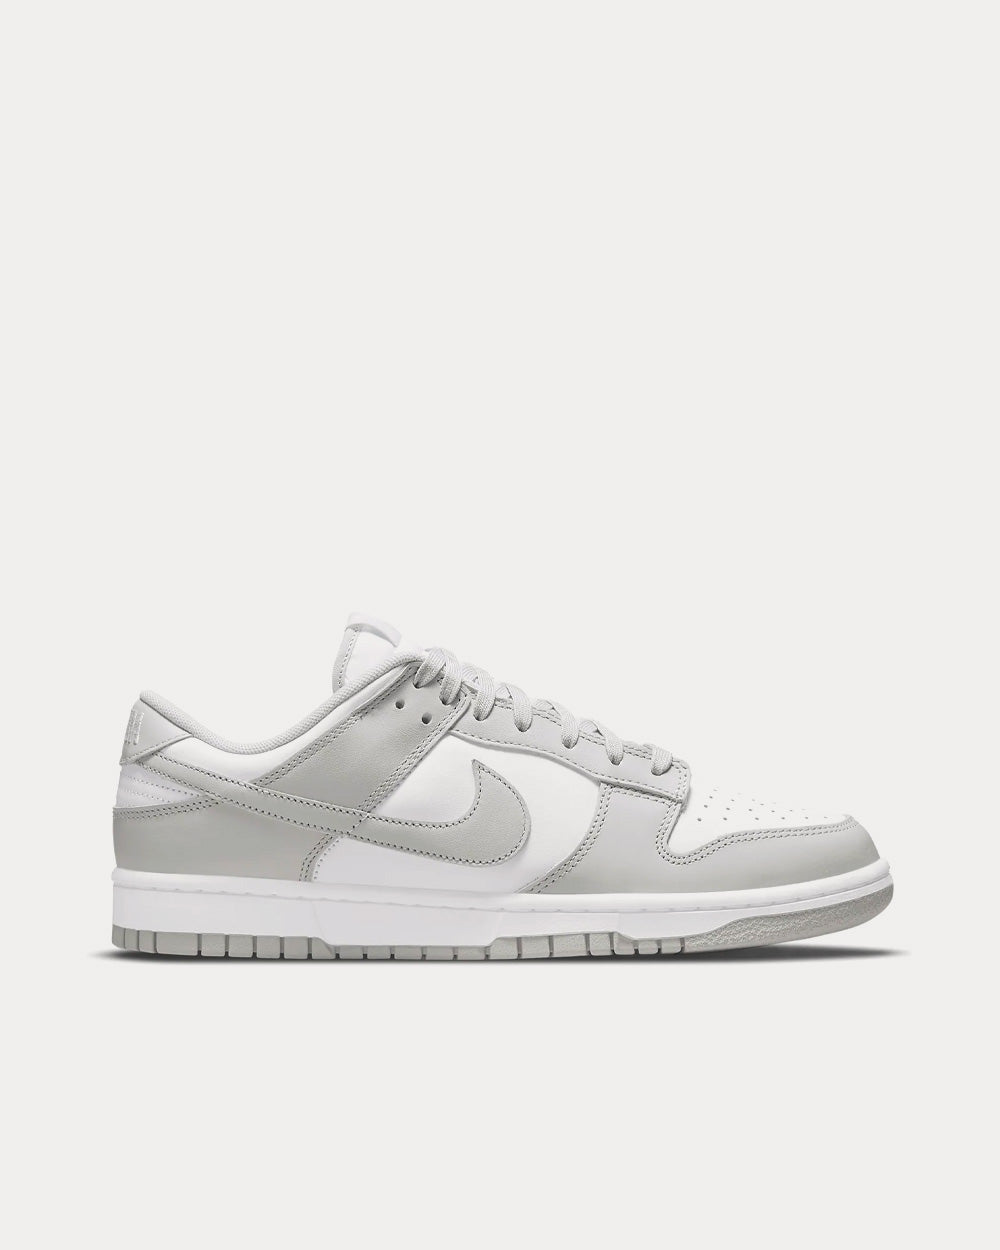 Dunk Low Retro White / Grey Fog Low Top Sneakers